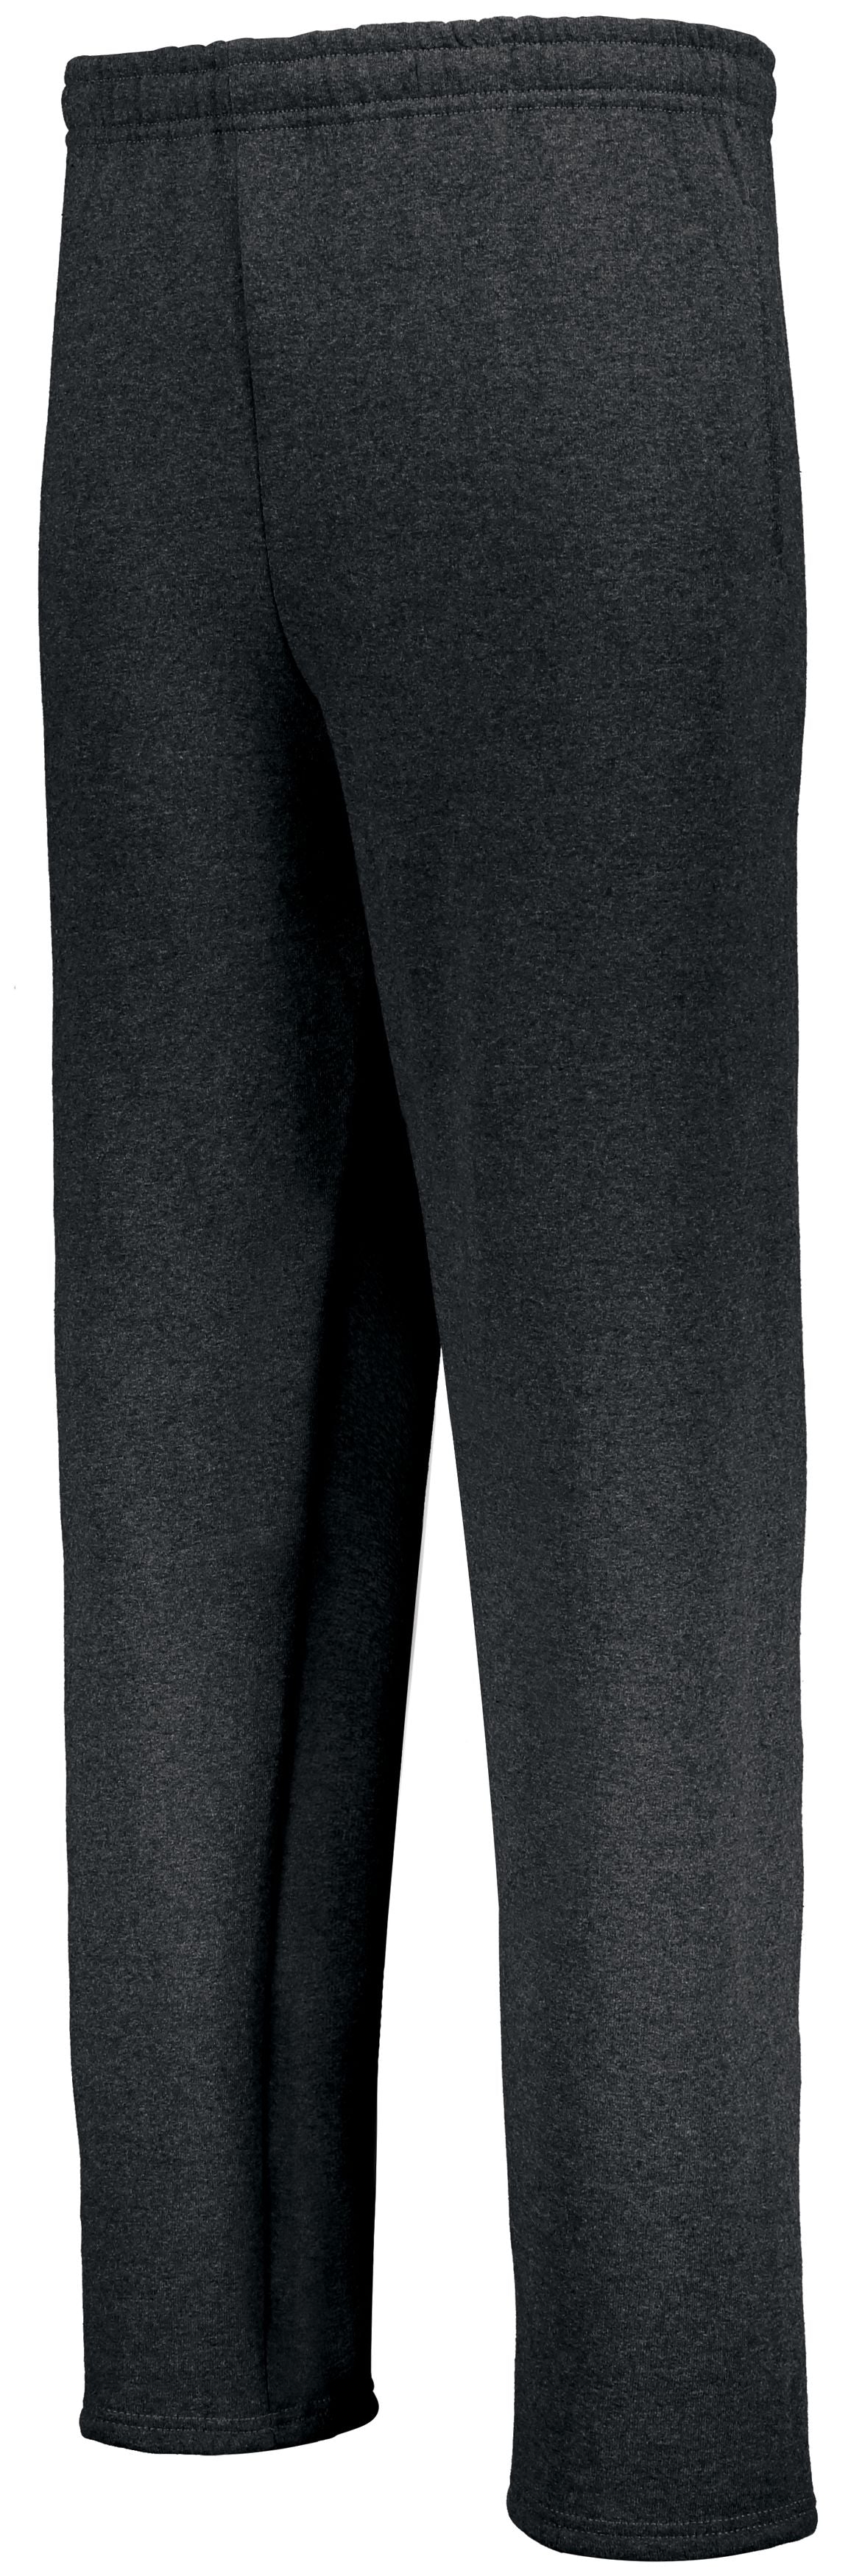 Russell Athletic Men's Dri-Power Open Bottom Sweatpants with